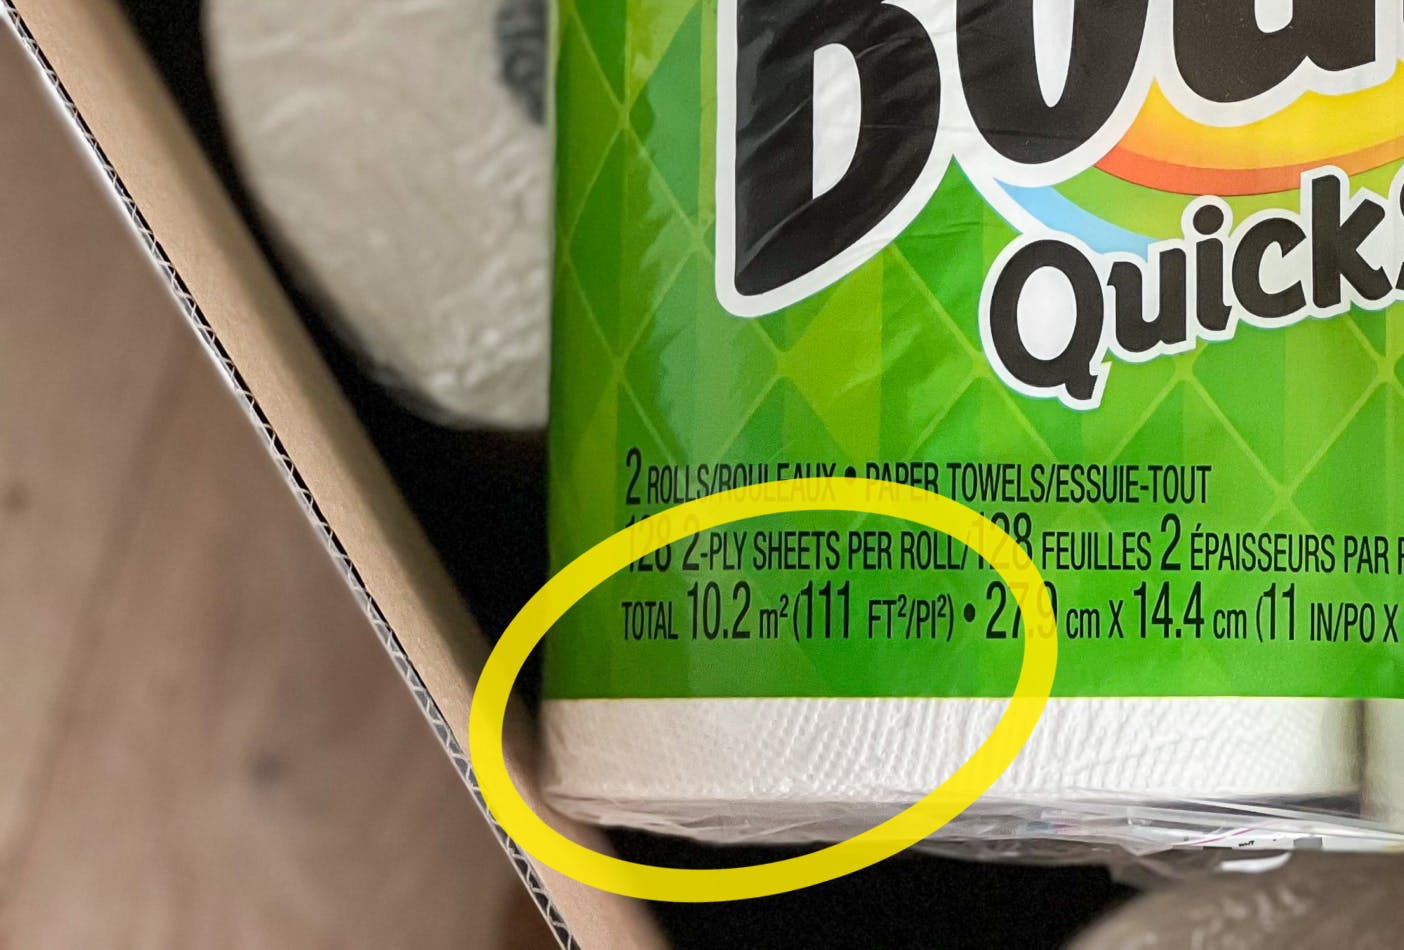 close up on bounty paper towel package with total 10.2m2 (111 Ft2/Pl2) circled